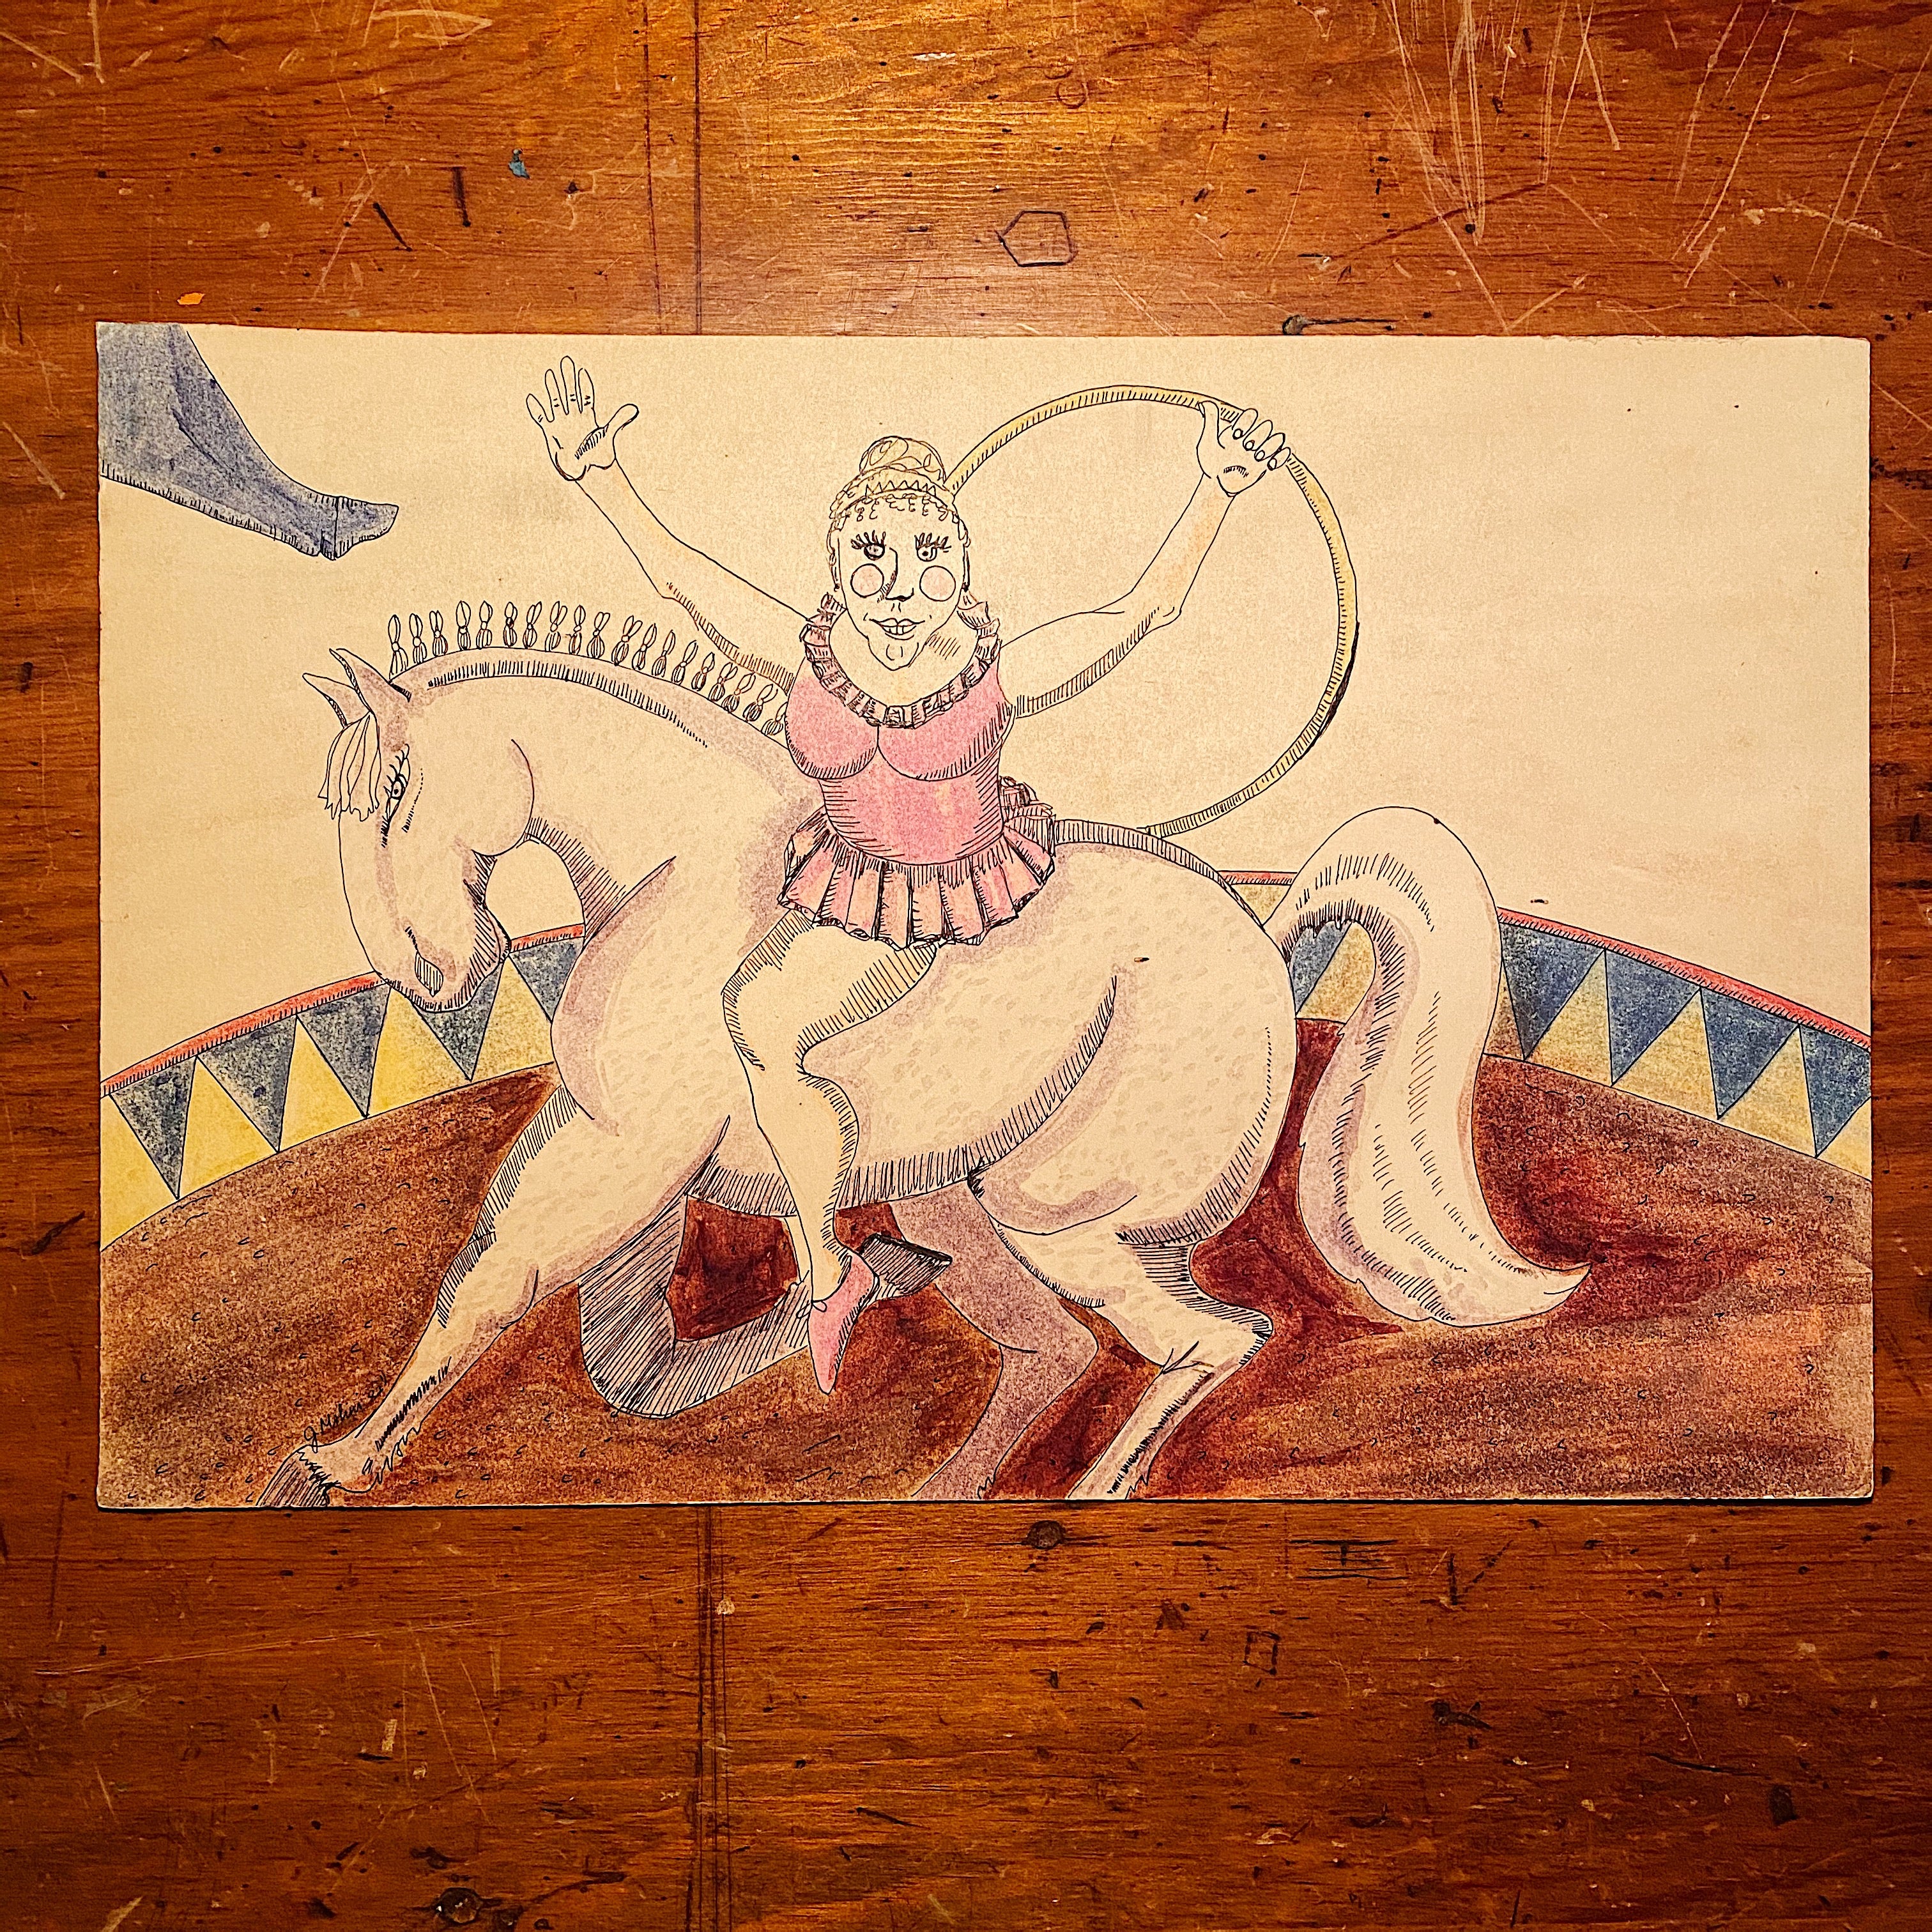 Outsider Art  of Circus Act from 1980s - Signed J. Mohni - Creepy Ink Watercolor on Board - Weird Fringe Artwork - Folk Art